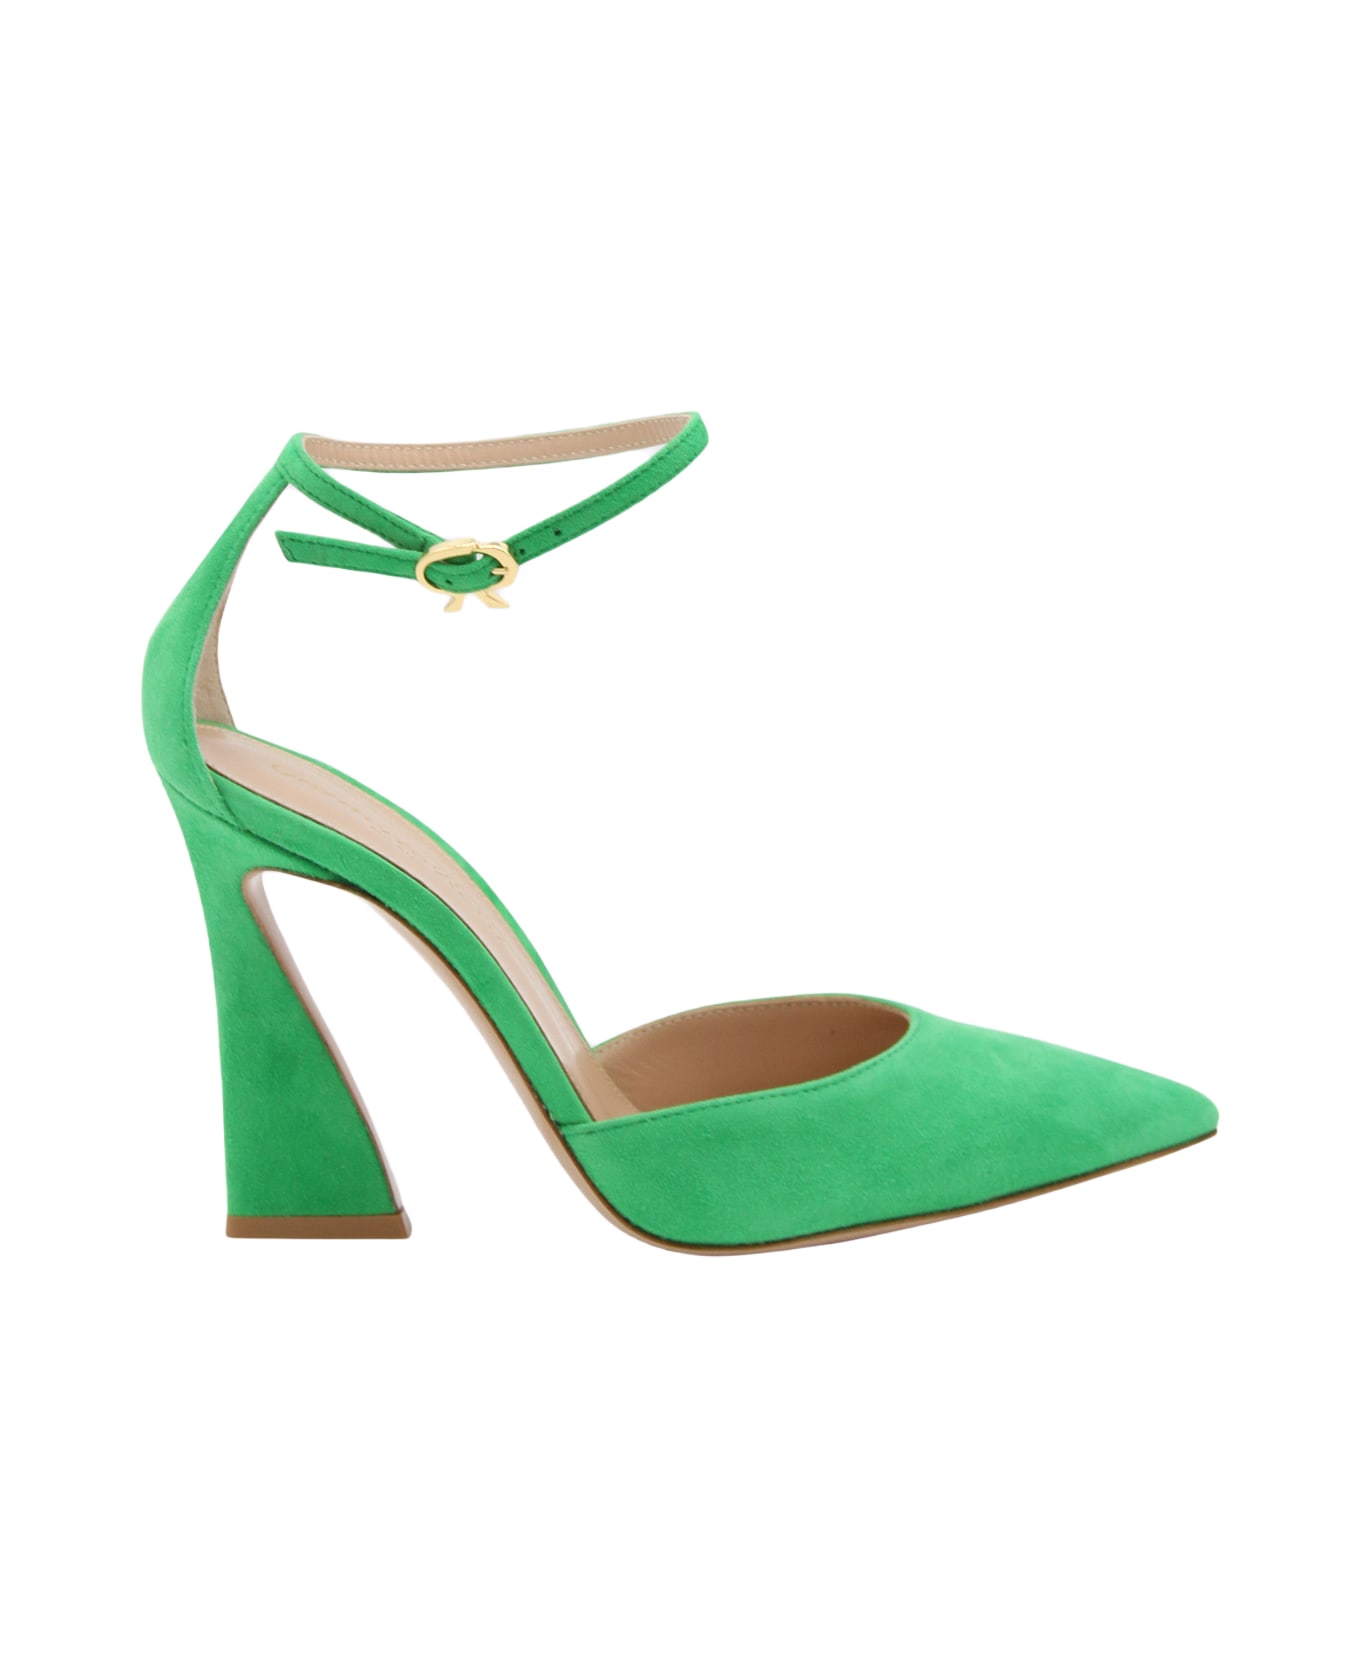 Gianvito Rossi Green Suede Holly Pumps - Green ハイヒール